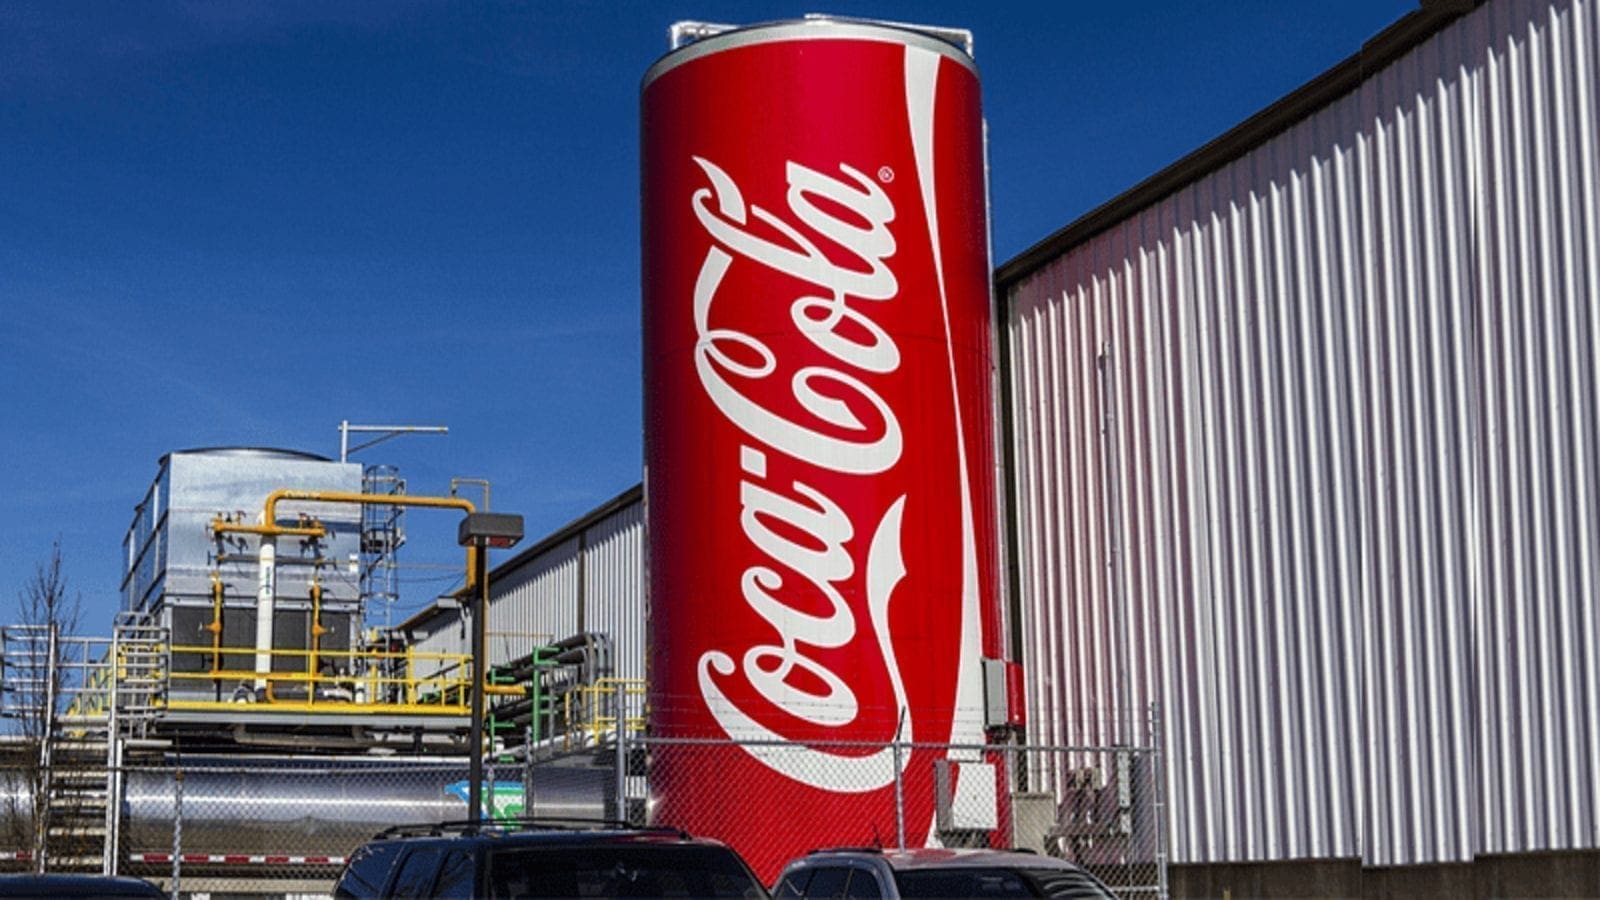 Hindustan Coca-Cola Beverages to source 50% of its energy from renewable sources